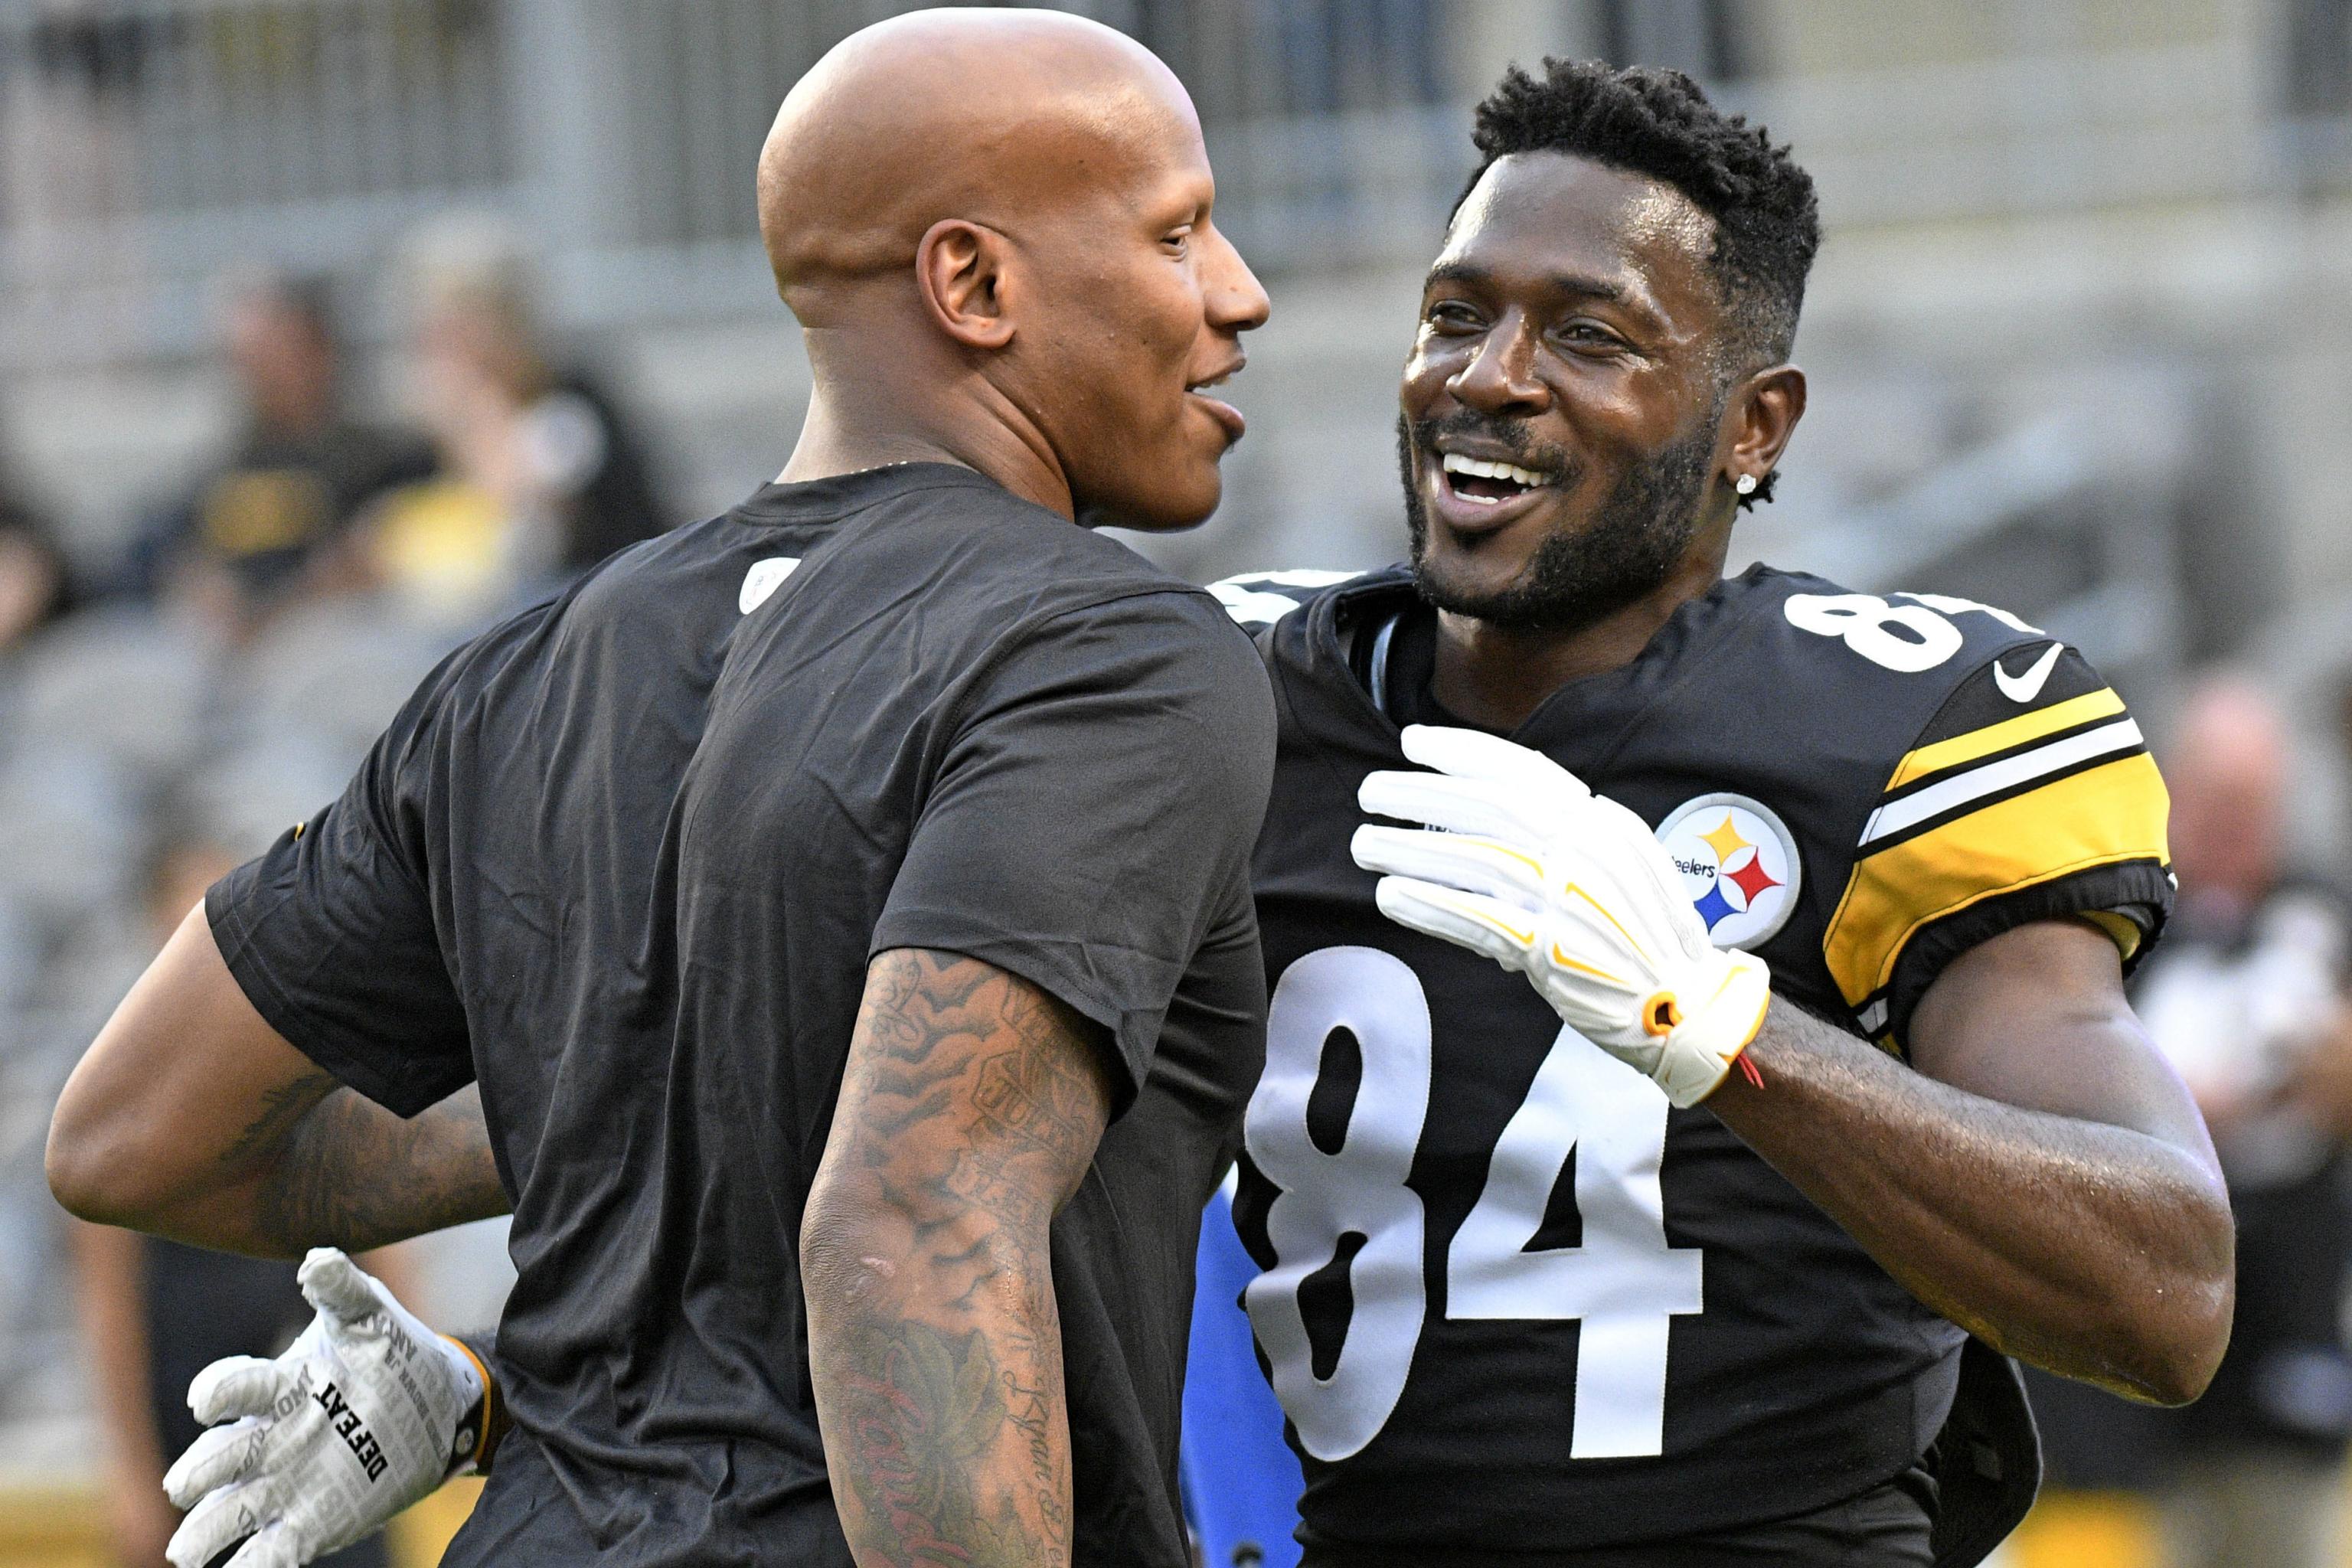 Antonio Brown warning from Ryan Shazier: 'All for attention'